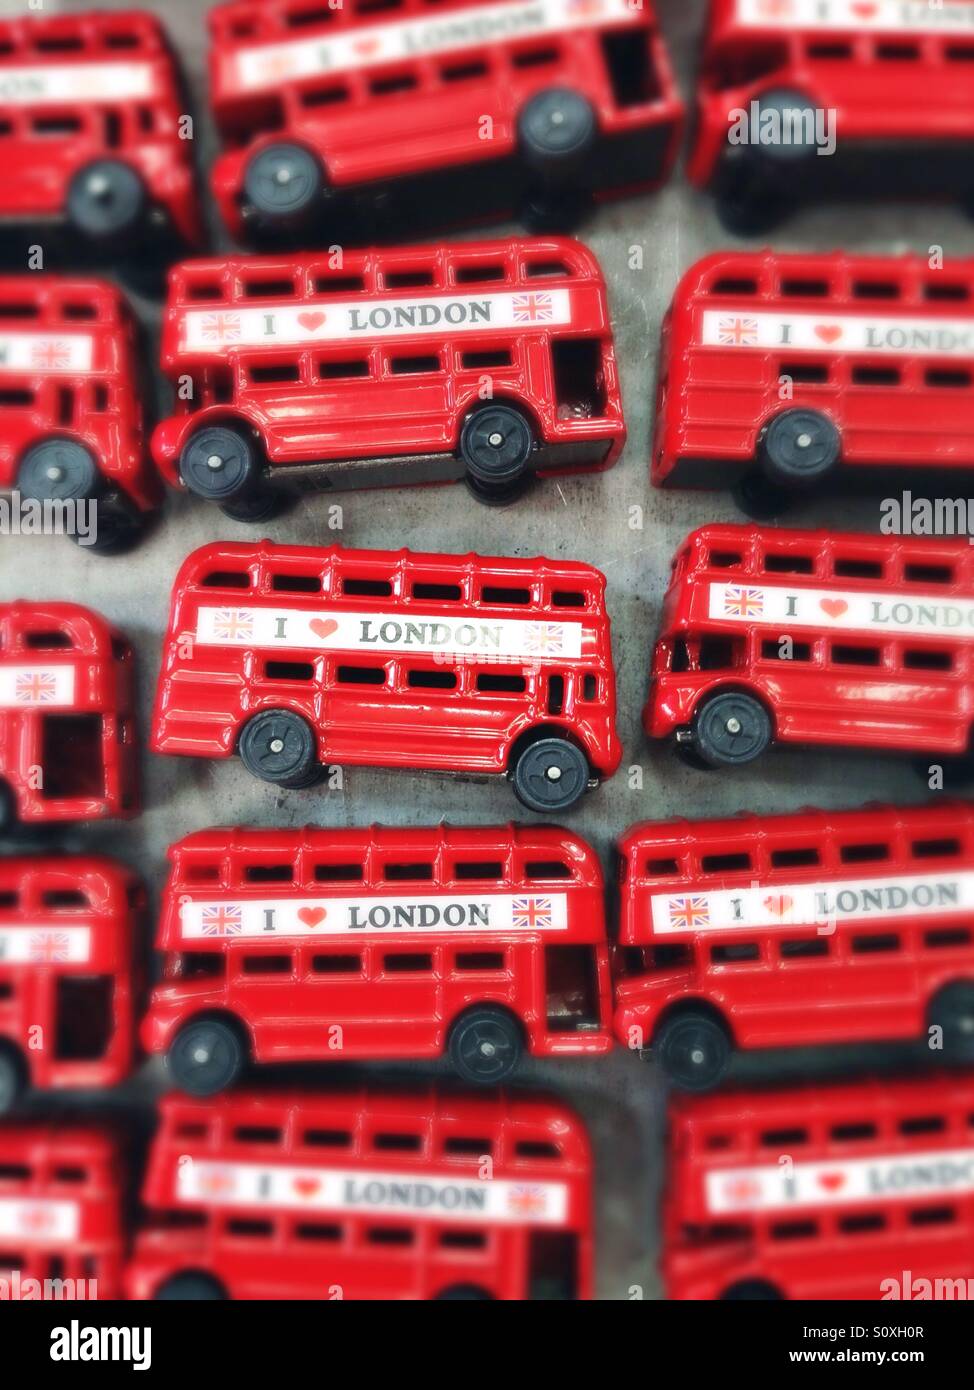 Red busses sold as souvenirs in Camden Town, London, UK Stock Photo